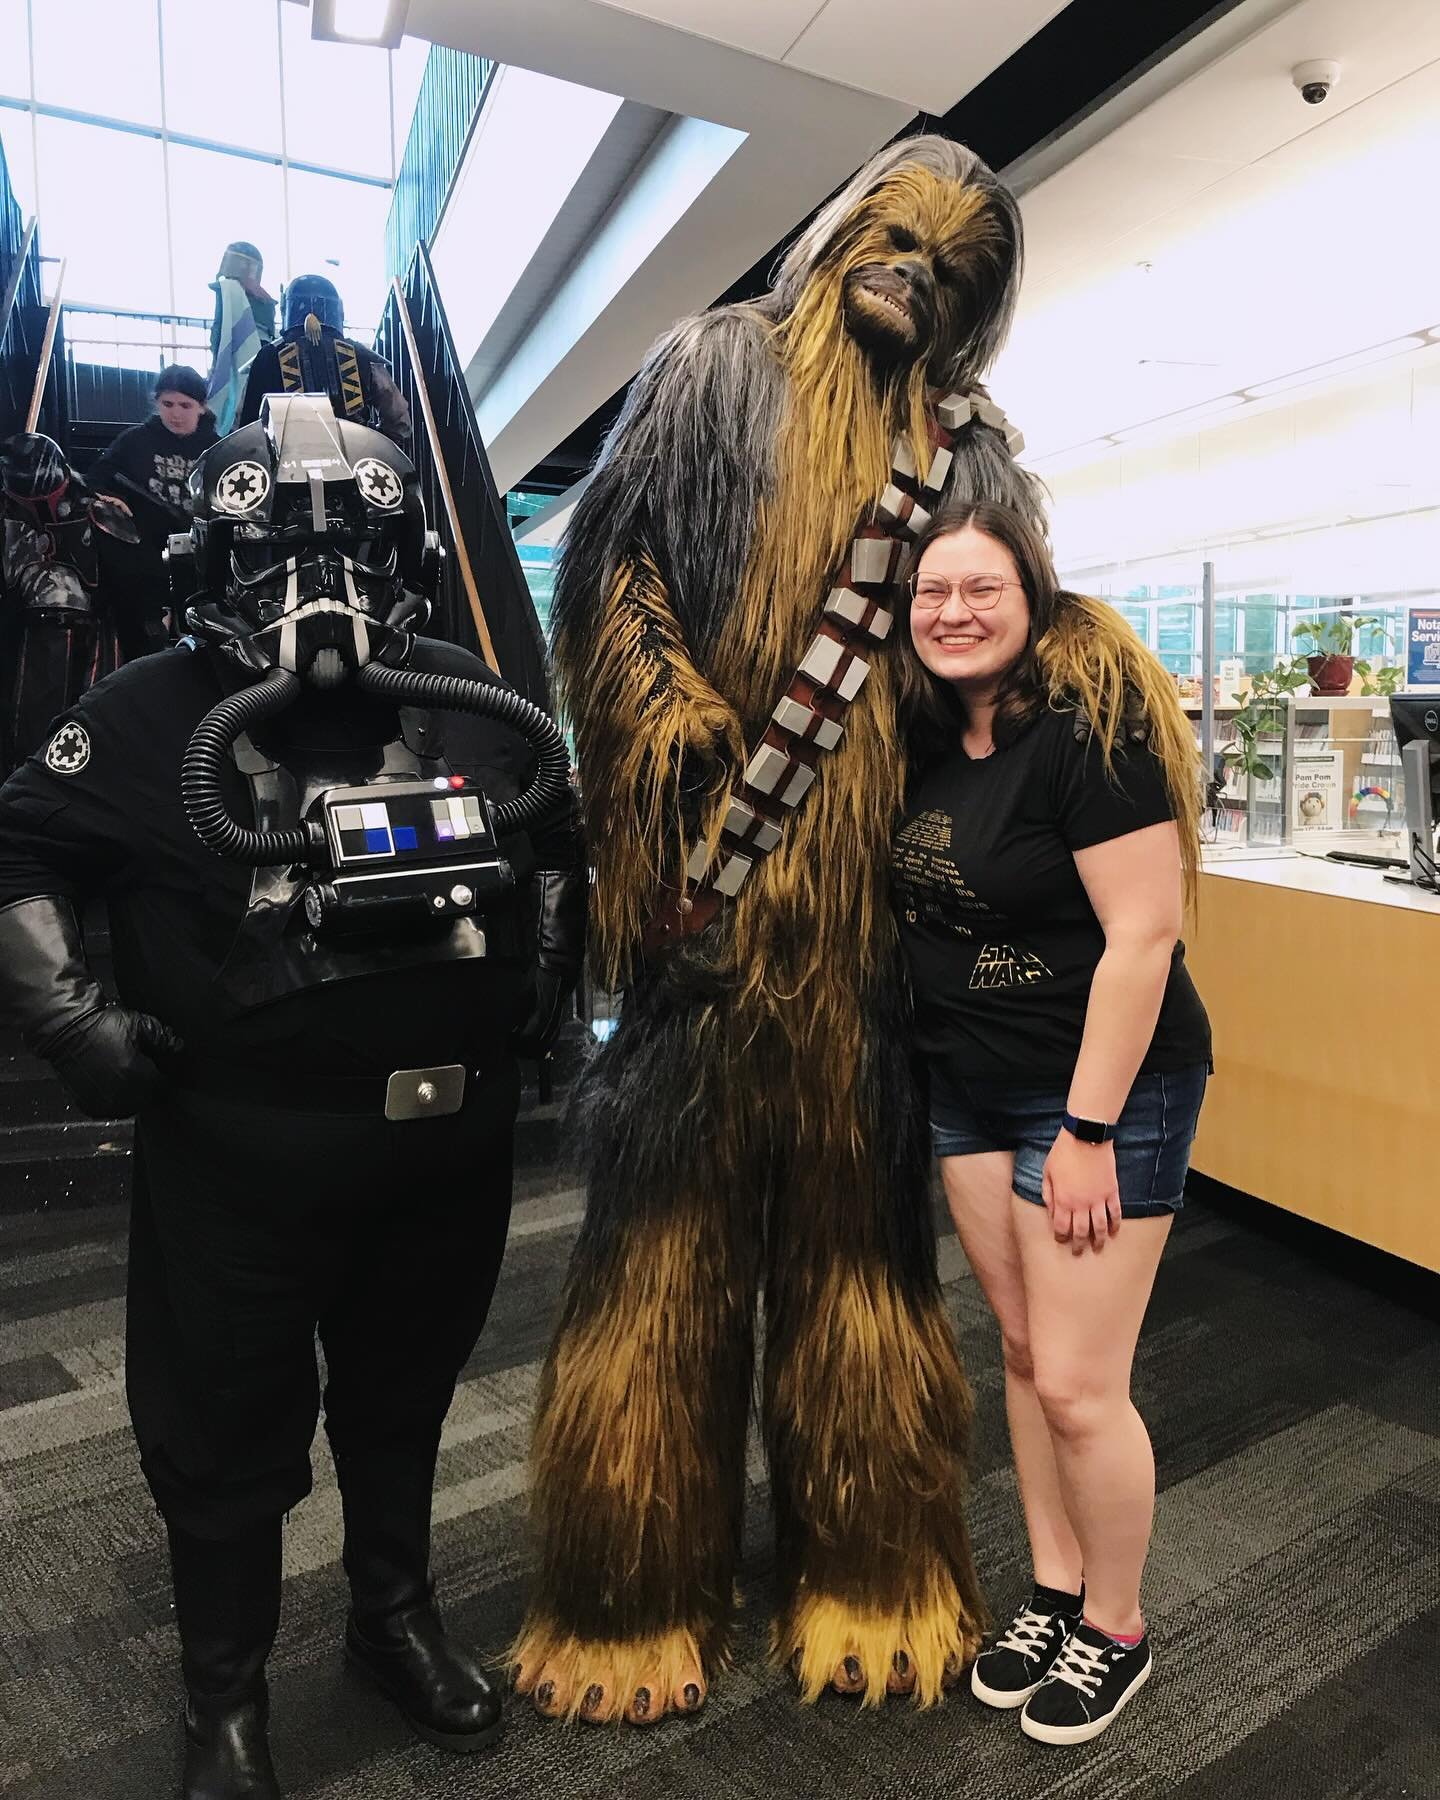 May the Fourth be with you. (And also with you.) 😁⭐️ 

A throwback to some Star Wars related pics I&rsquo;ve taken. 😂 I&rsquo;m not sure I&rsquo;ve ever felt so short as I did with a Wookiee. Also including an oldie but a goodie from high school wh